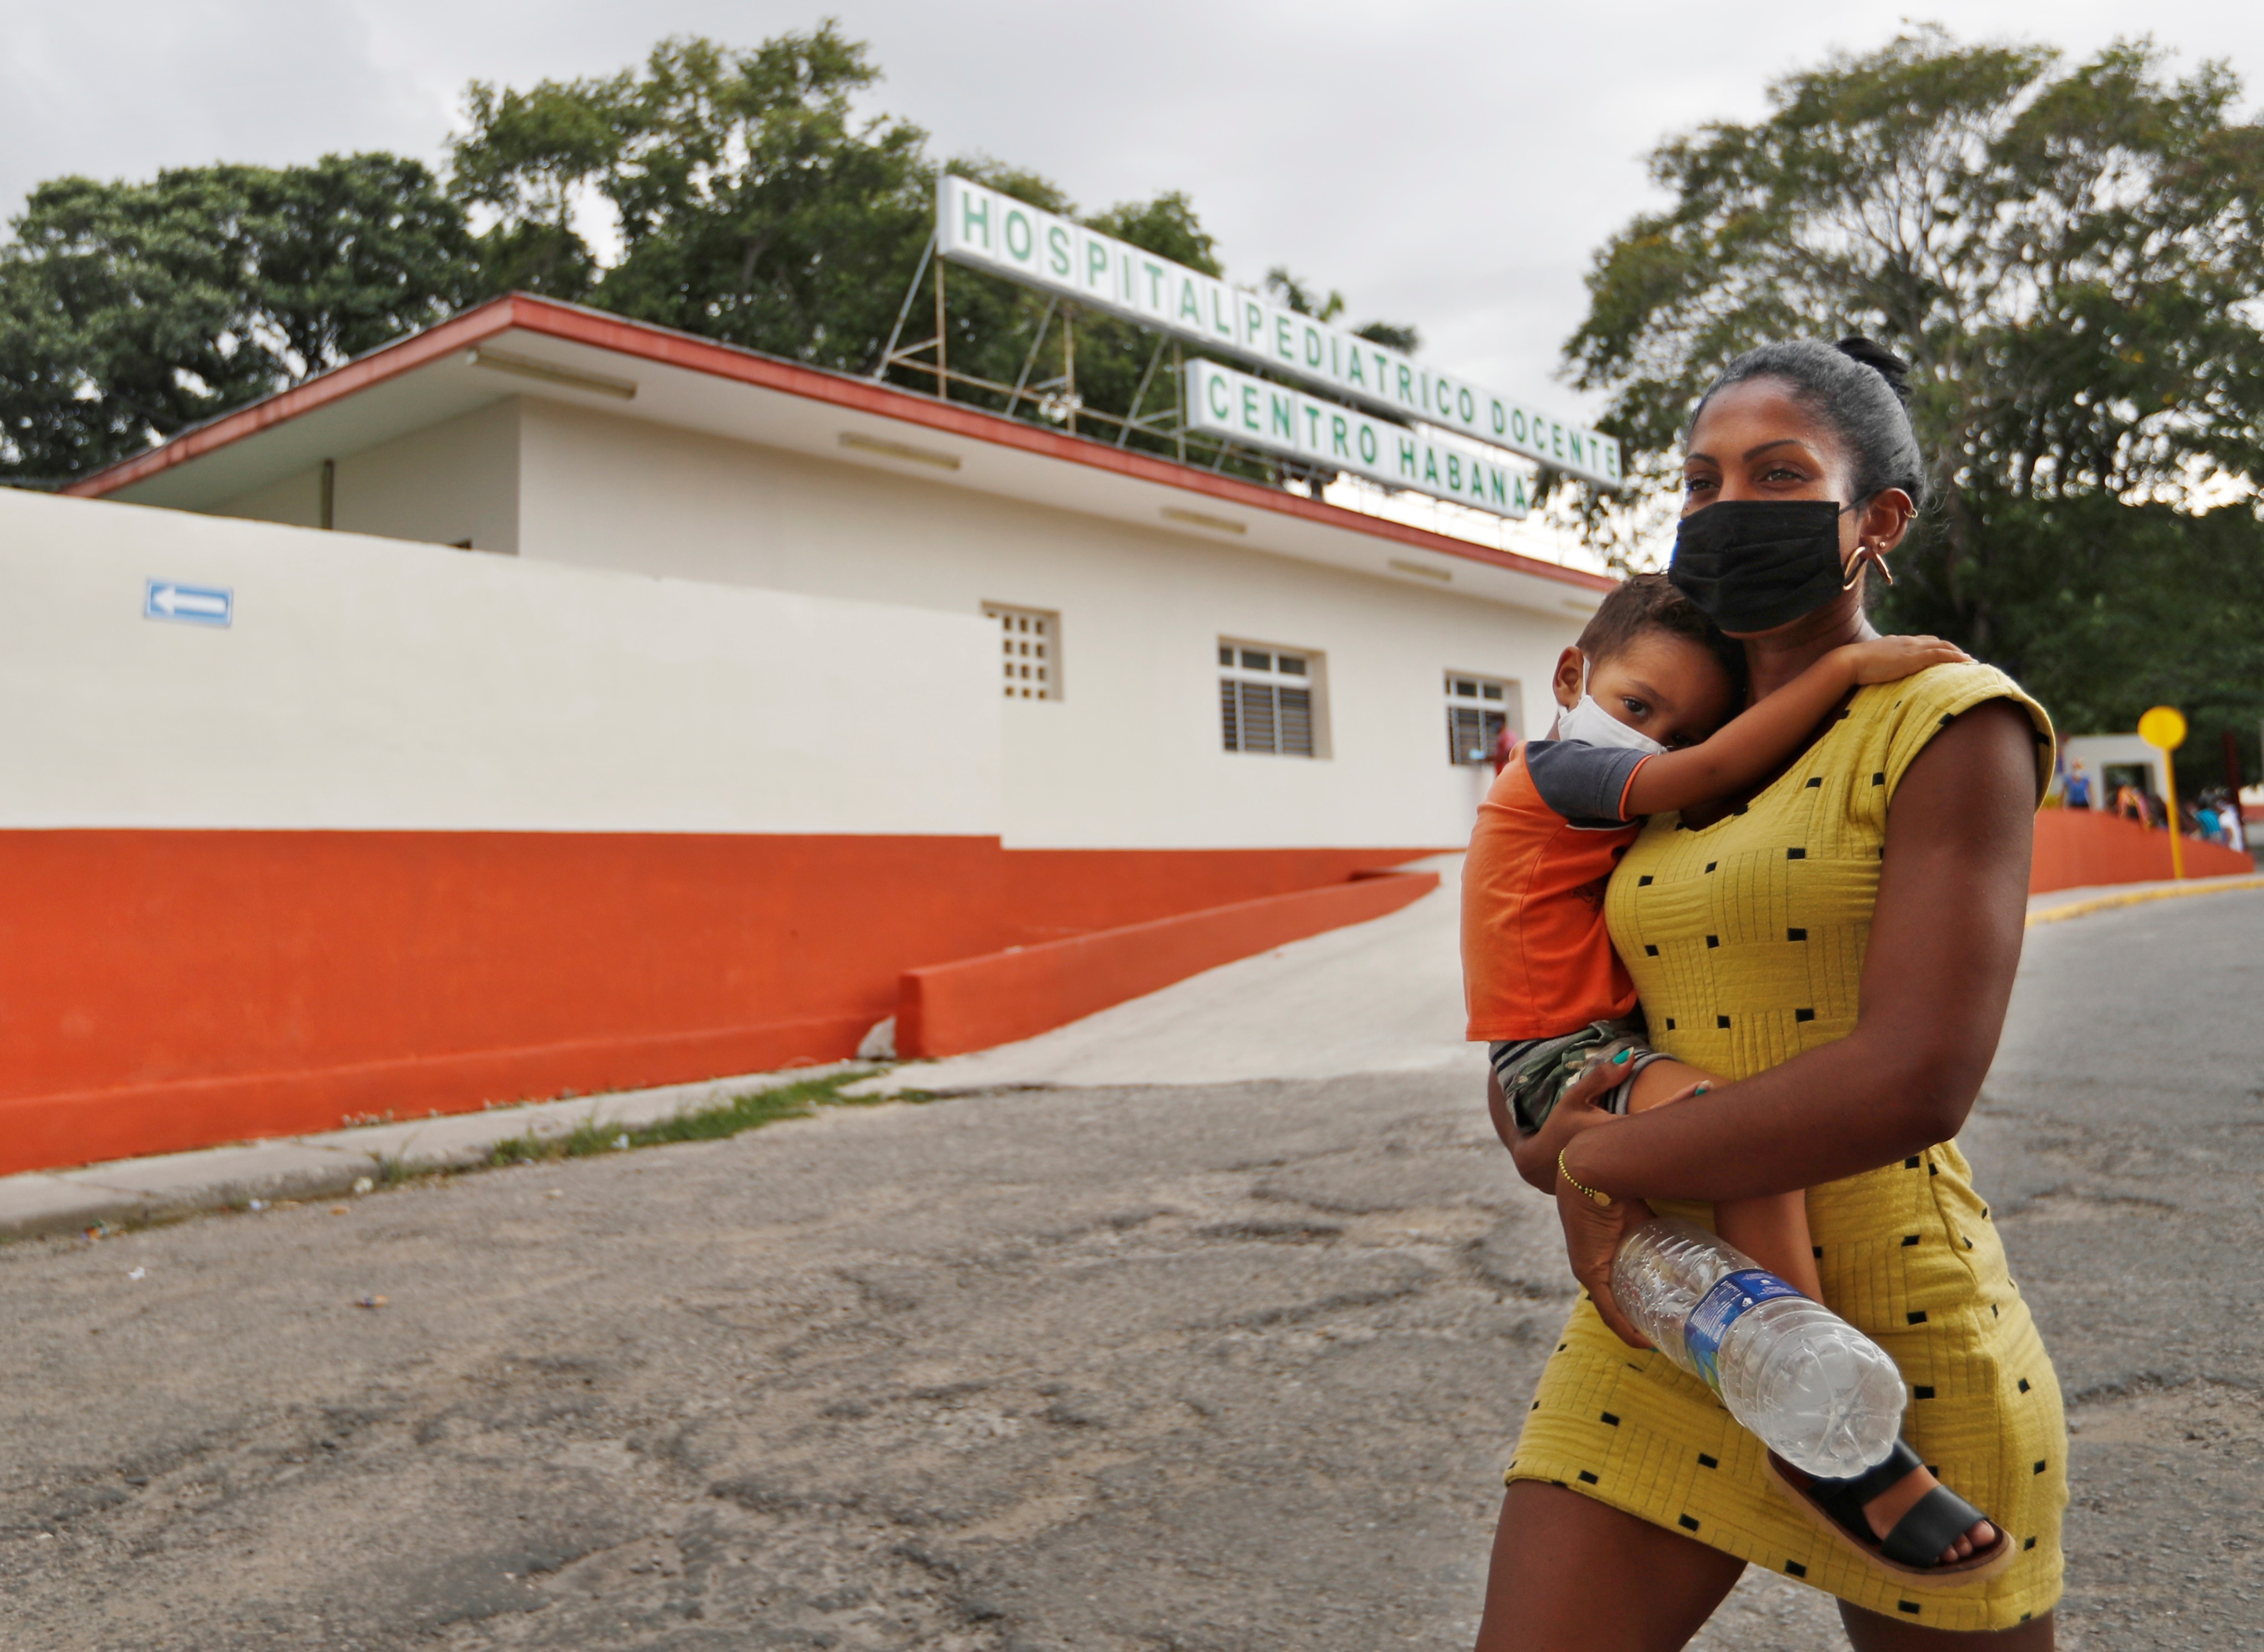 A mother with her son in her arms leaves a children's hospital in Havana, Cuba, in a file photo.  EFE / Yander Zamora